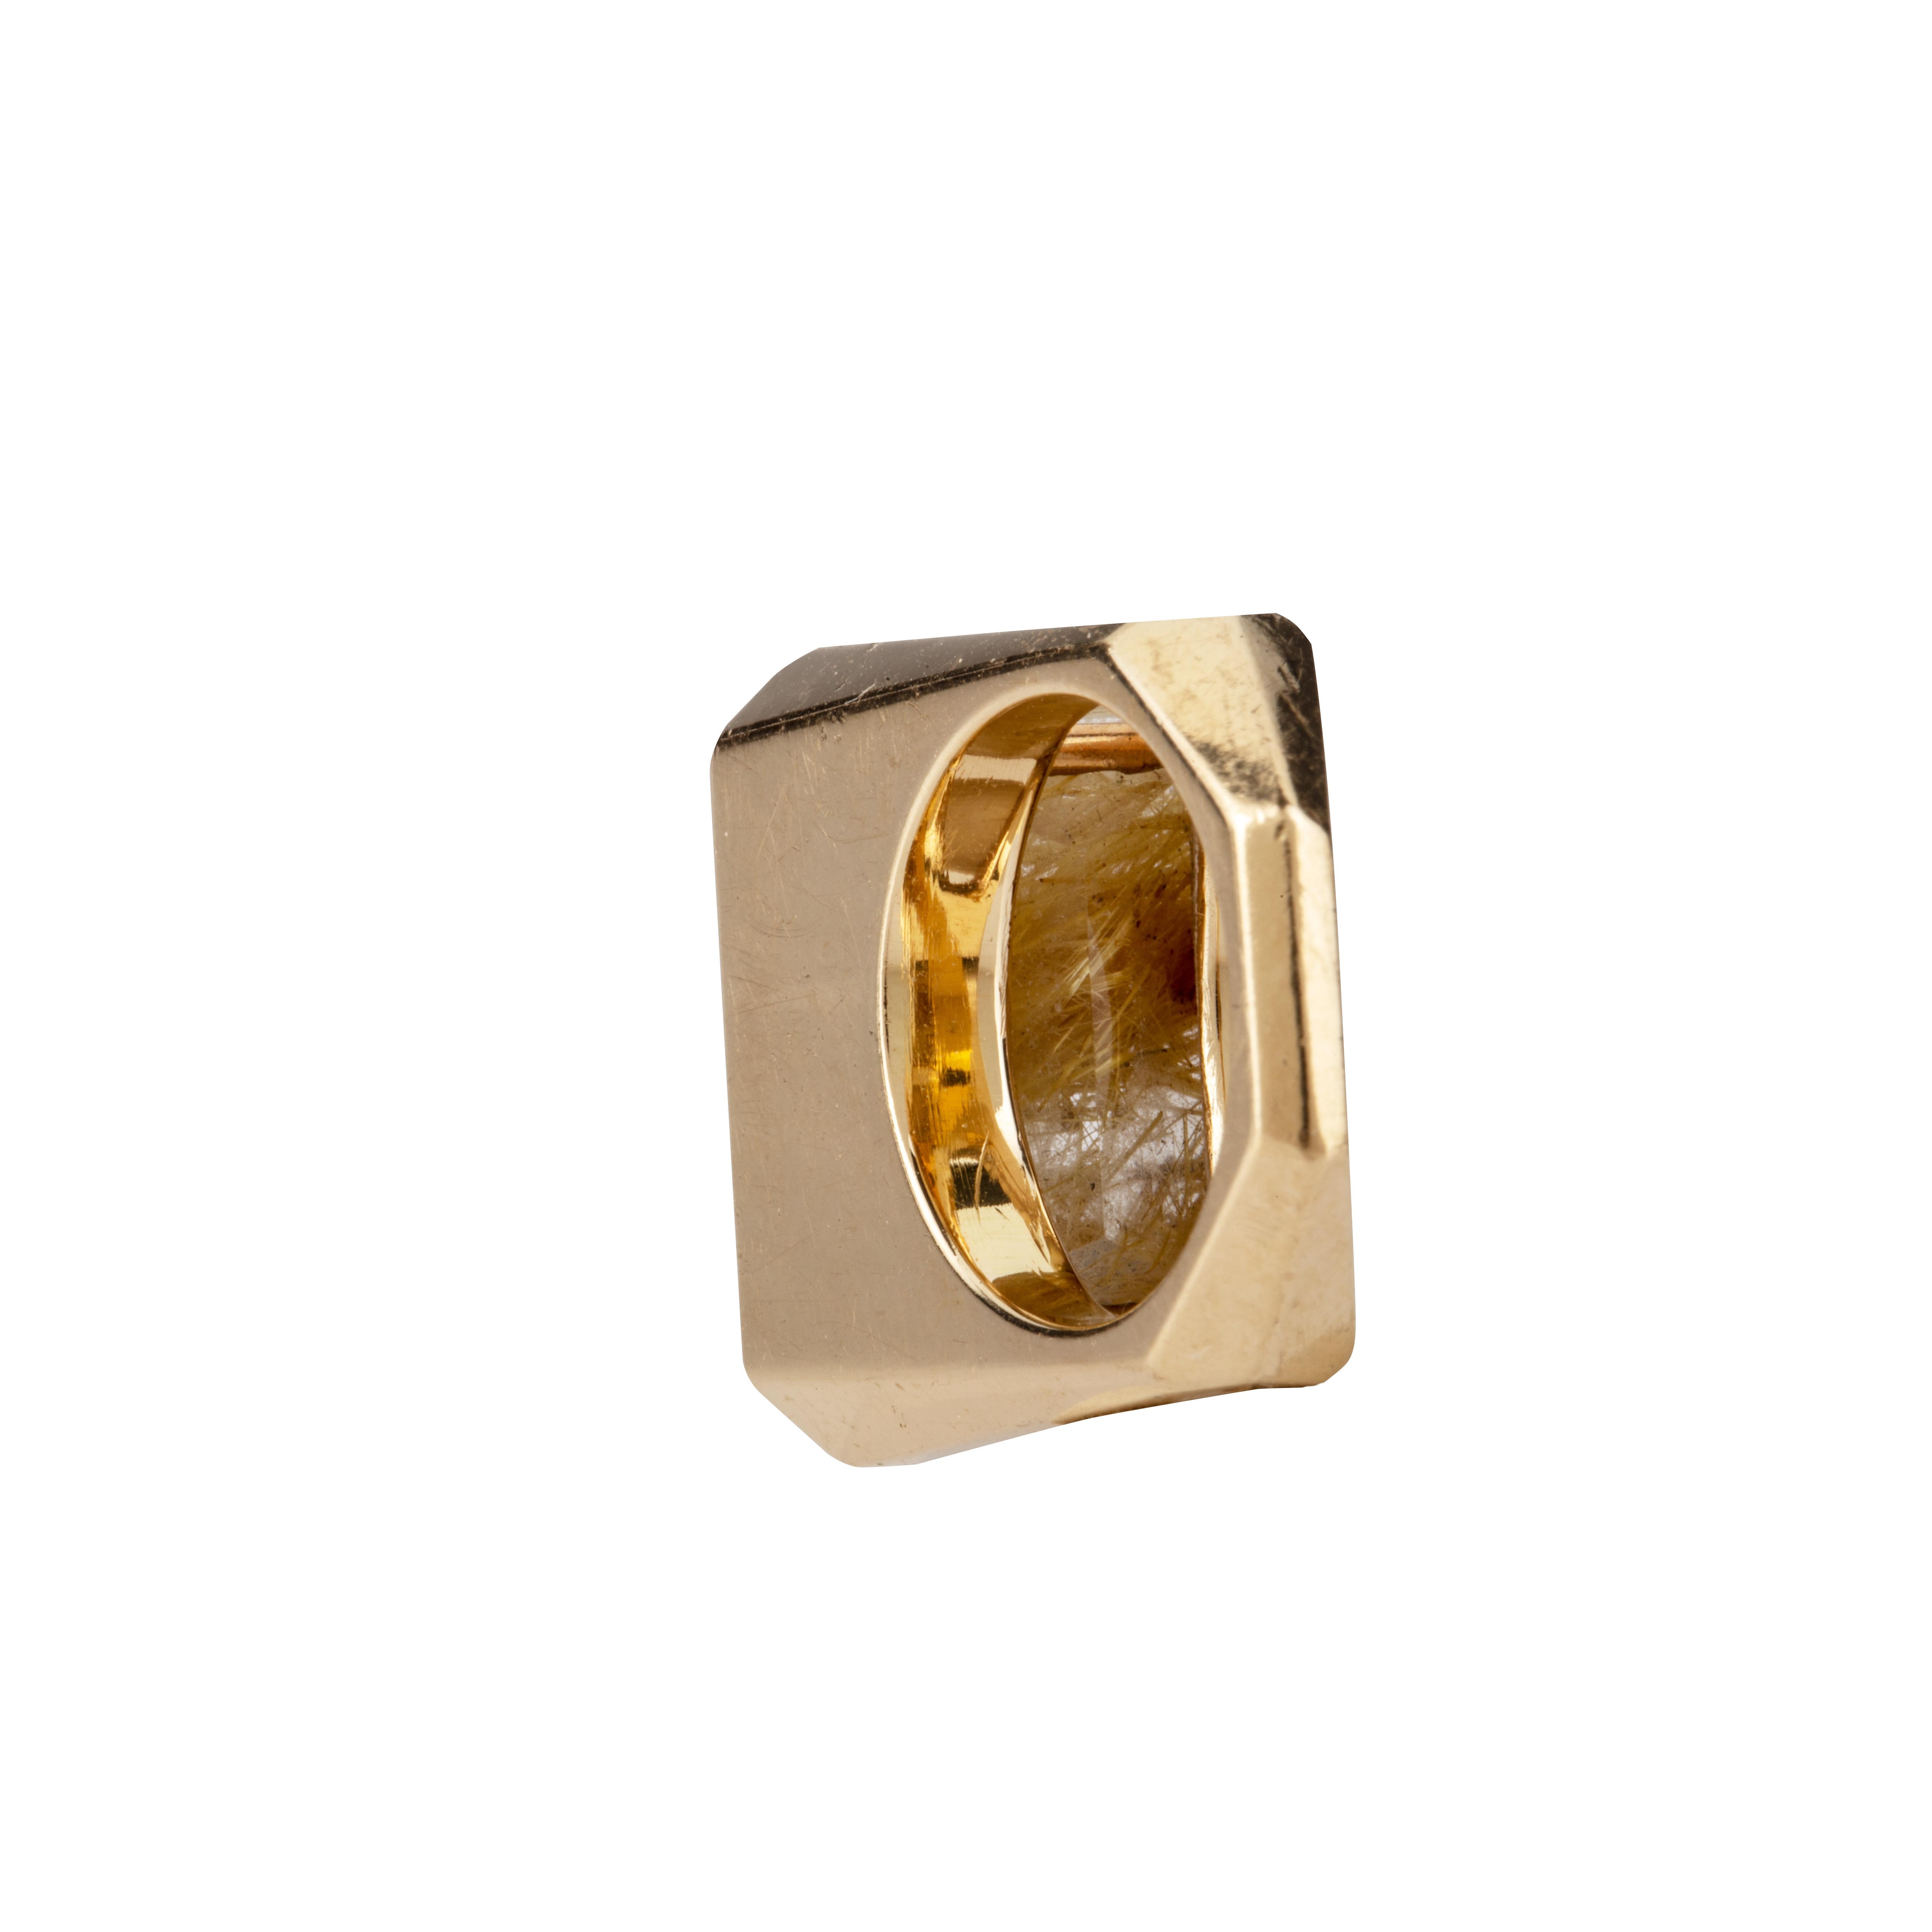 18 k Gold  21 gr Natural  yellow rutileted quartz ring chevalier shape. Size 13 eu is possible to resize the ring.
All Giulia Colussi jewelry is new and has never been previously owned or worn. Each item will arrive at your door beautifully gift